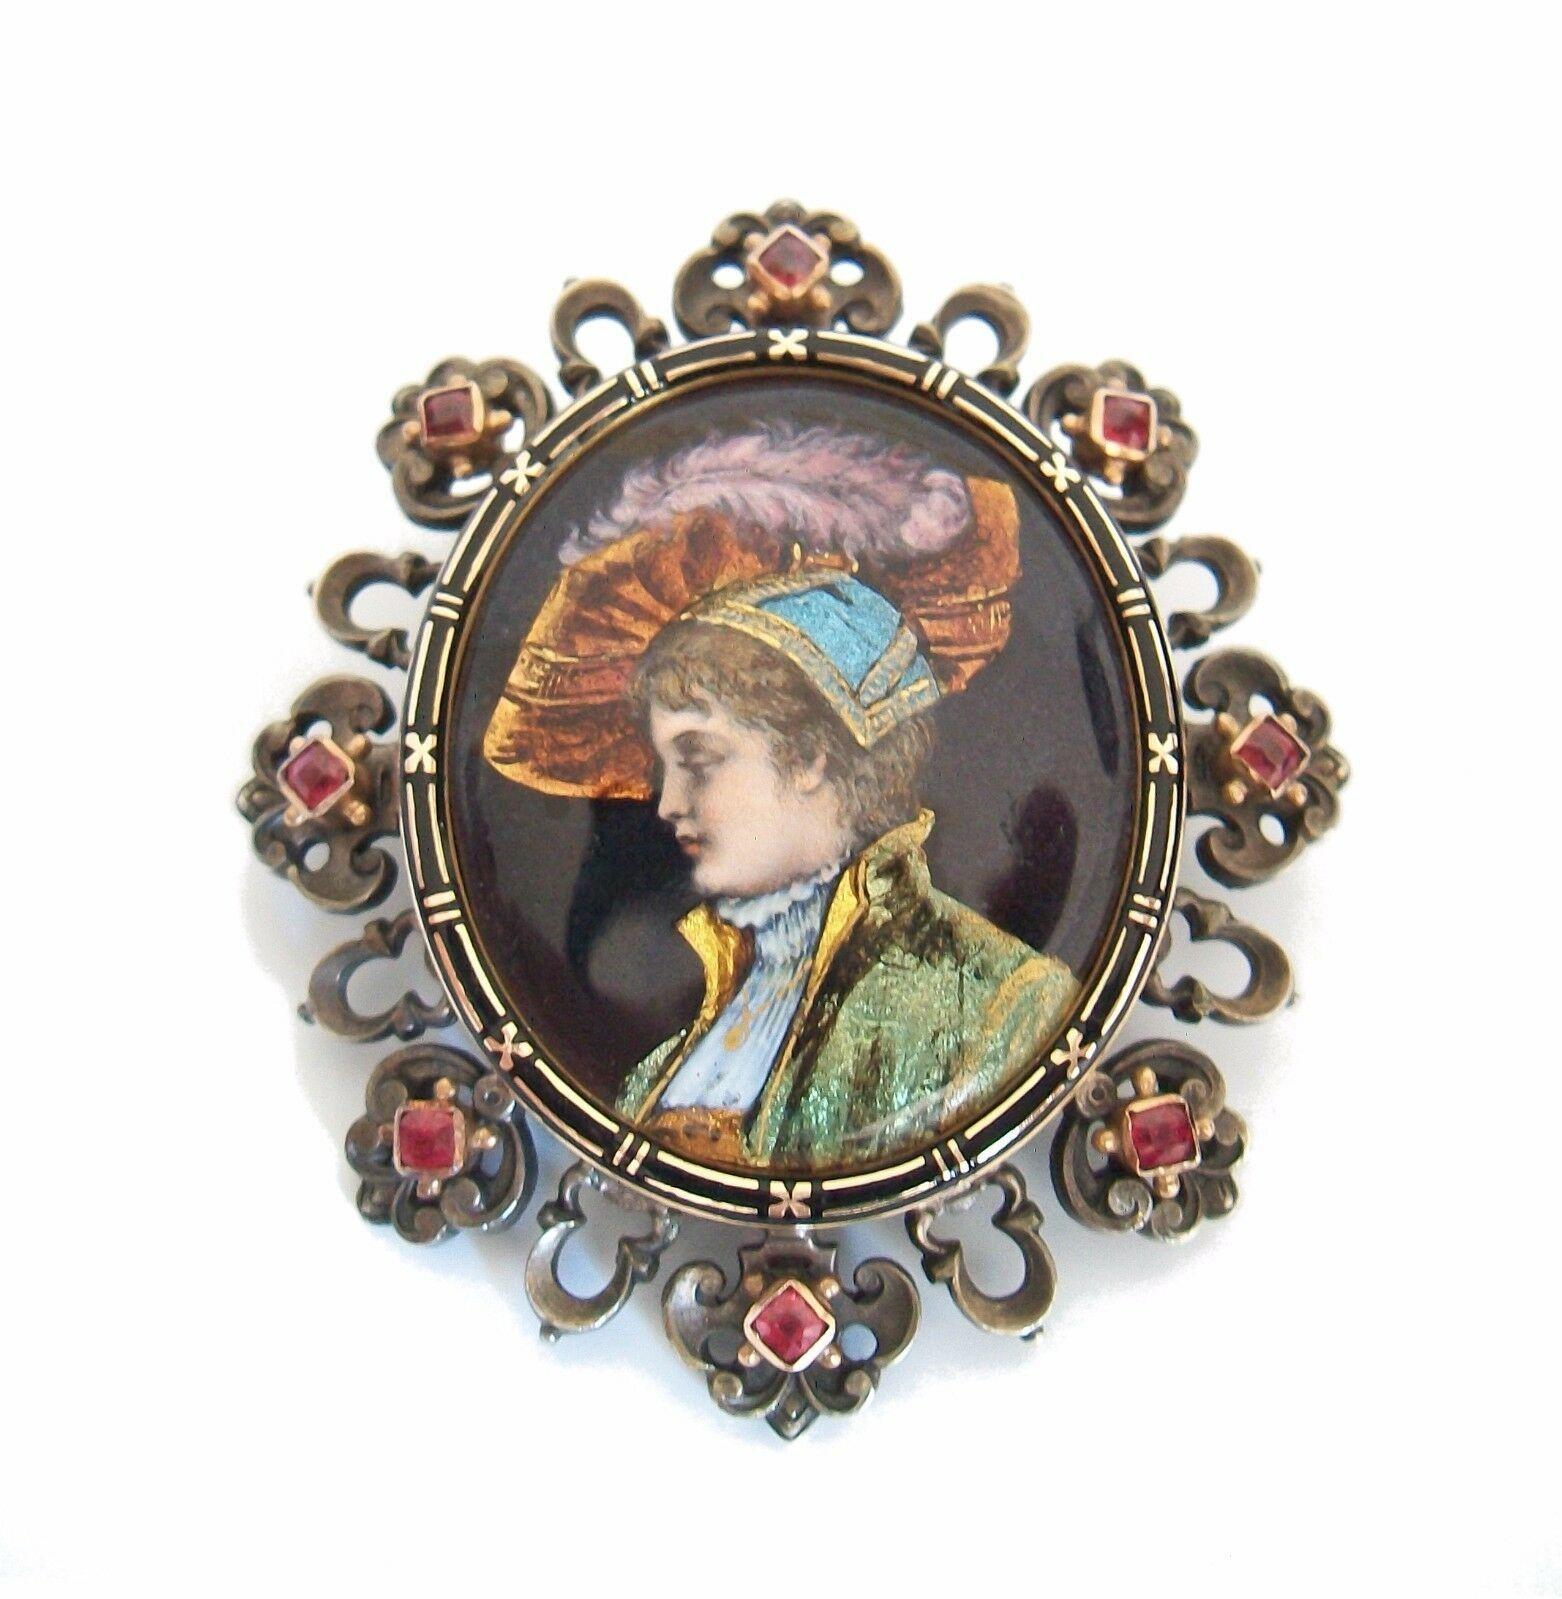 Exceptional and rare Renaissance Revival Limoges enamel brooch - the colorful portrait miniature of a woman in Renaissance dress and hat against a midnight blue background set within an 18K yellow gold and black enamel decorated oval frame - mounted